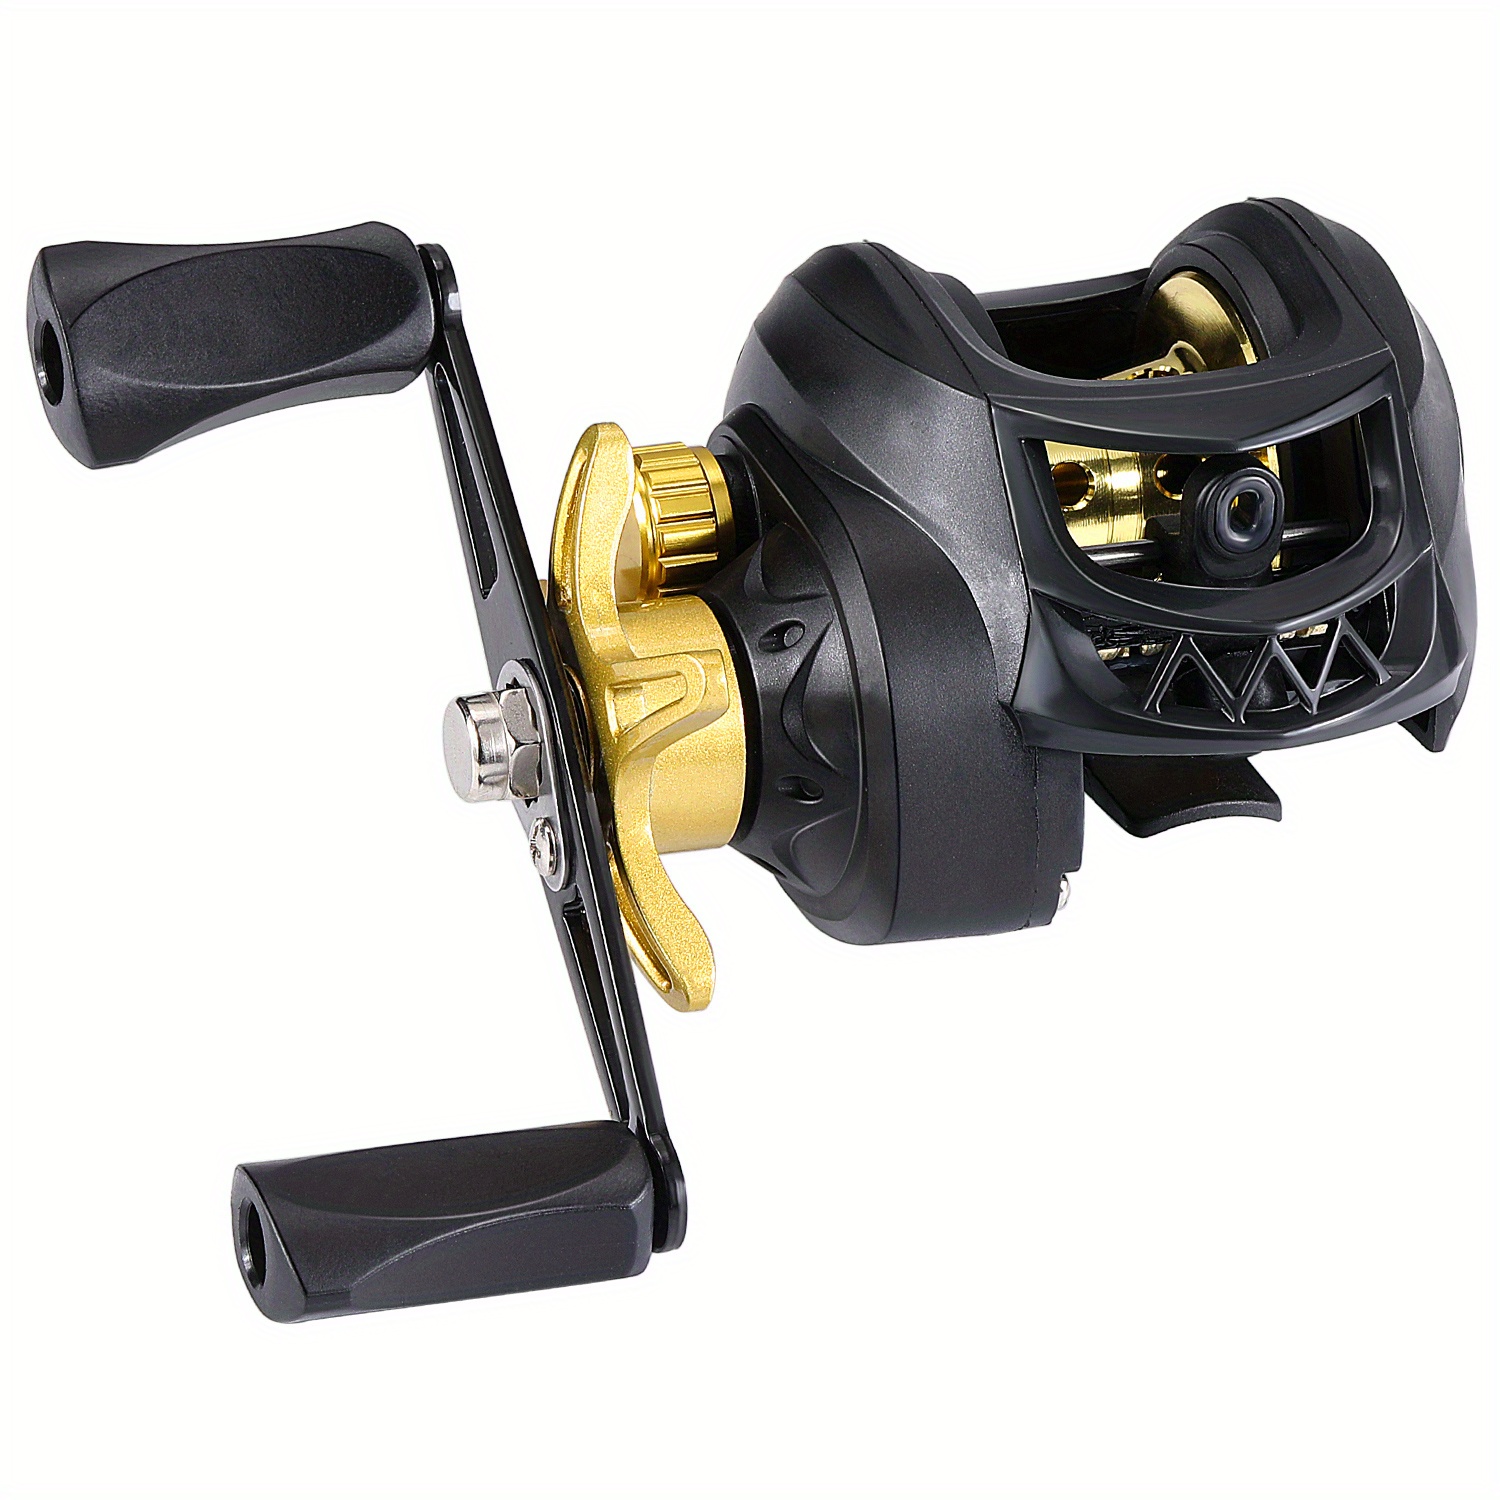 Southern California - Miscellaneous, Fishing gear, Shimano and Phenix  casting rods and reels, Bait casters and spinning